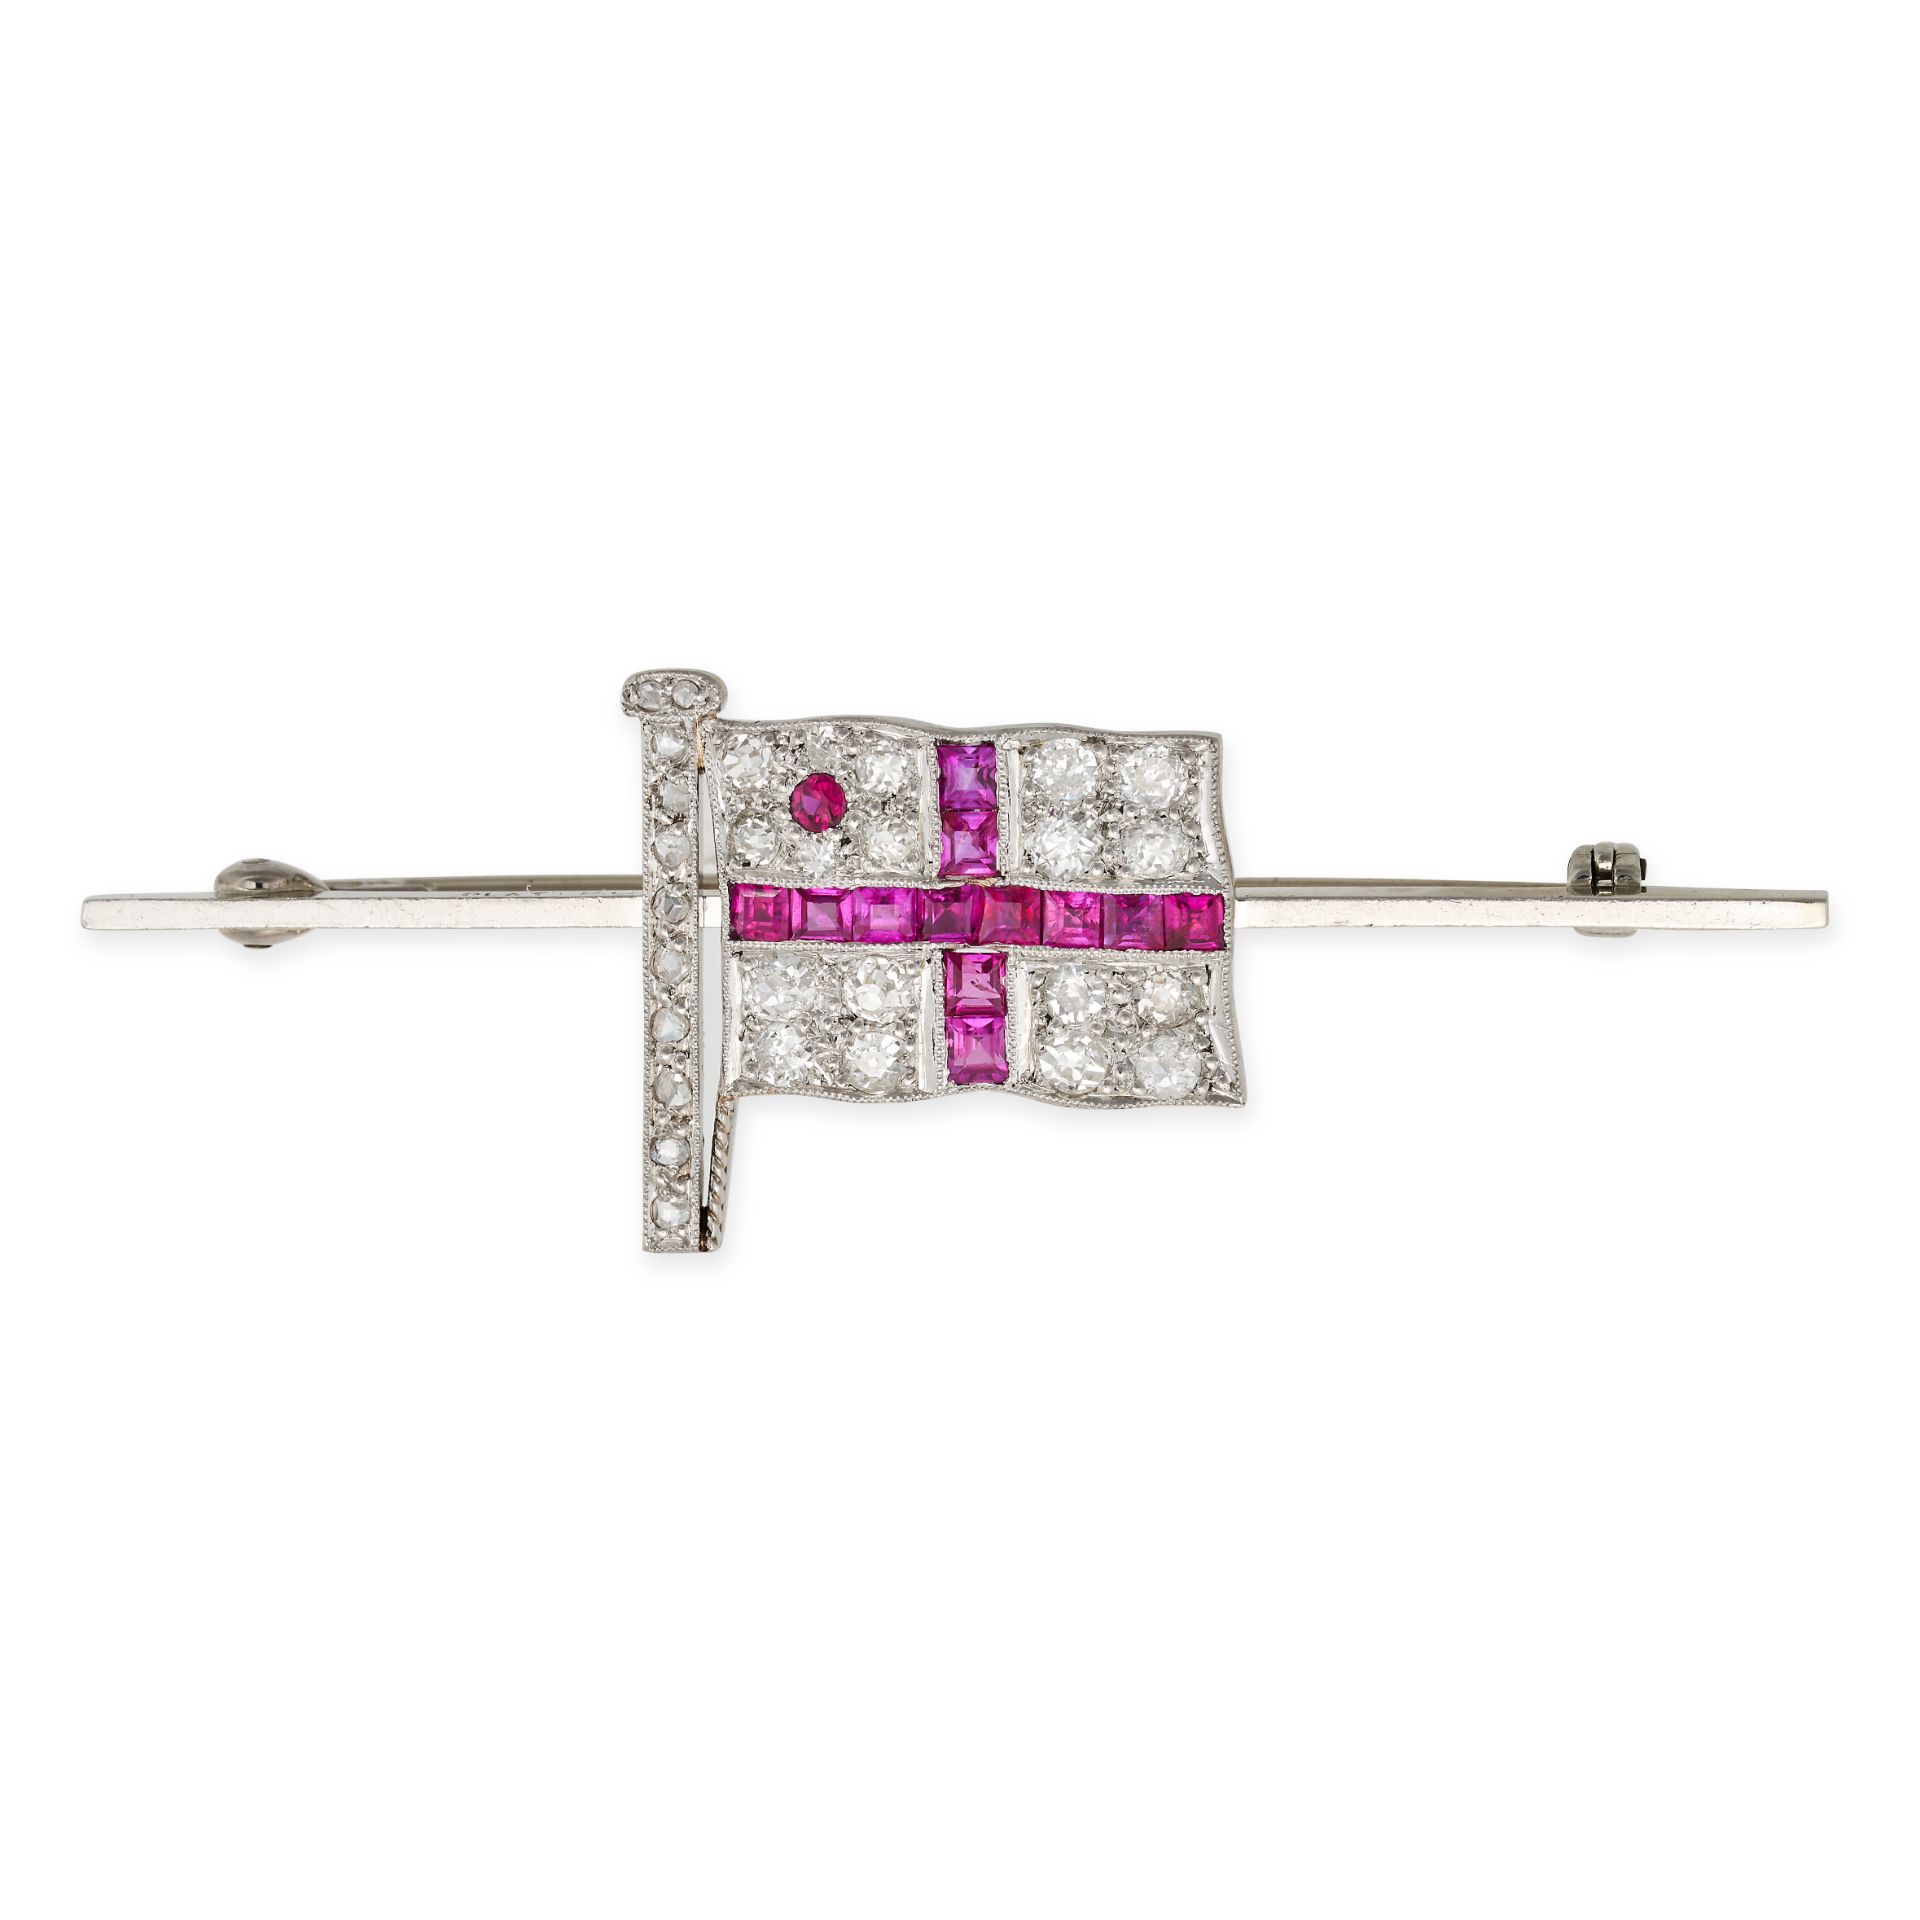 A DIAMOND AND RUBY FLAG BROOCH in 18ct white gold and platinum, designed as St George's flag set ...